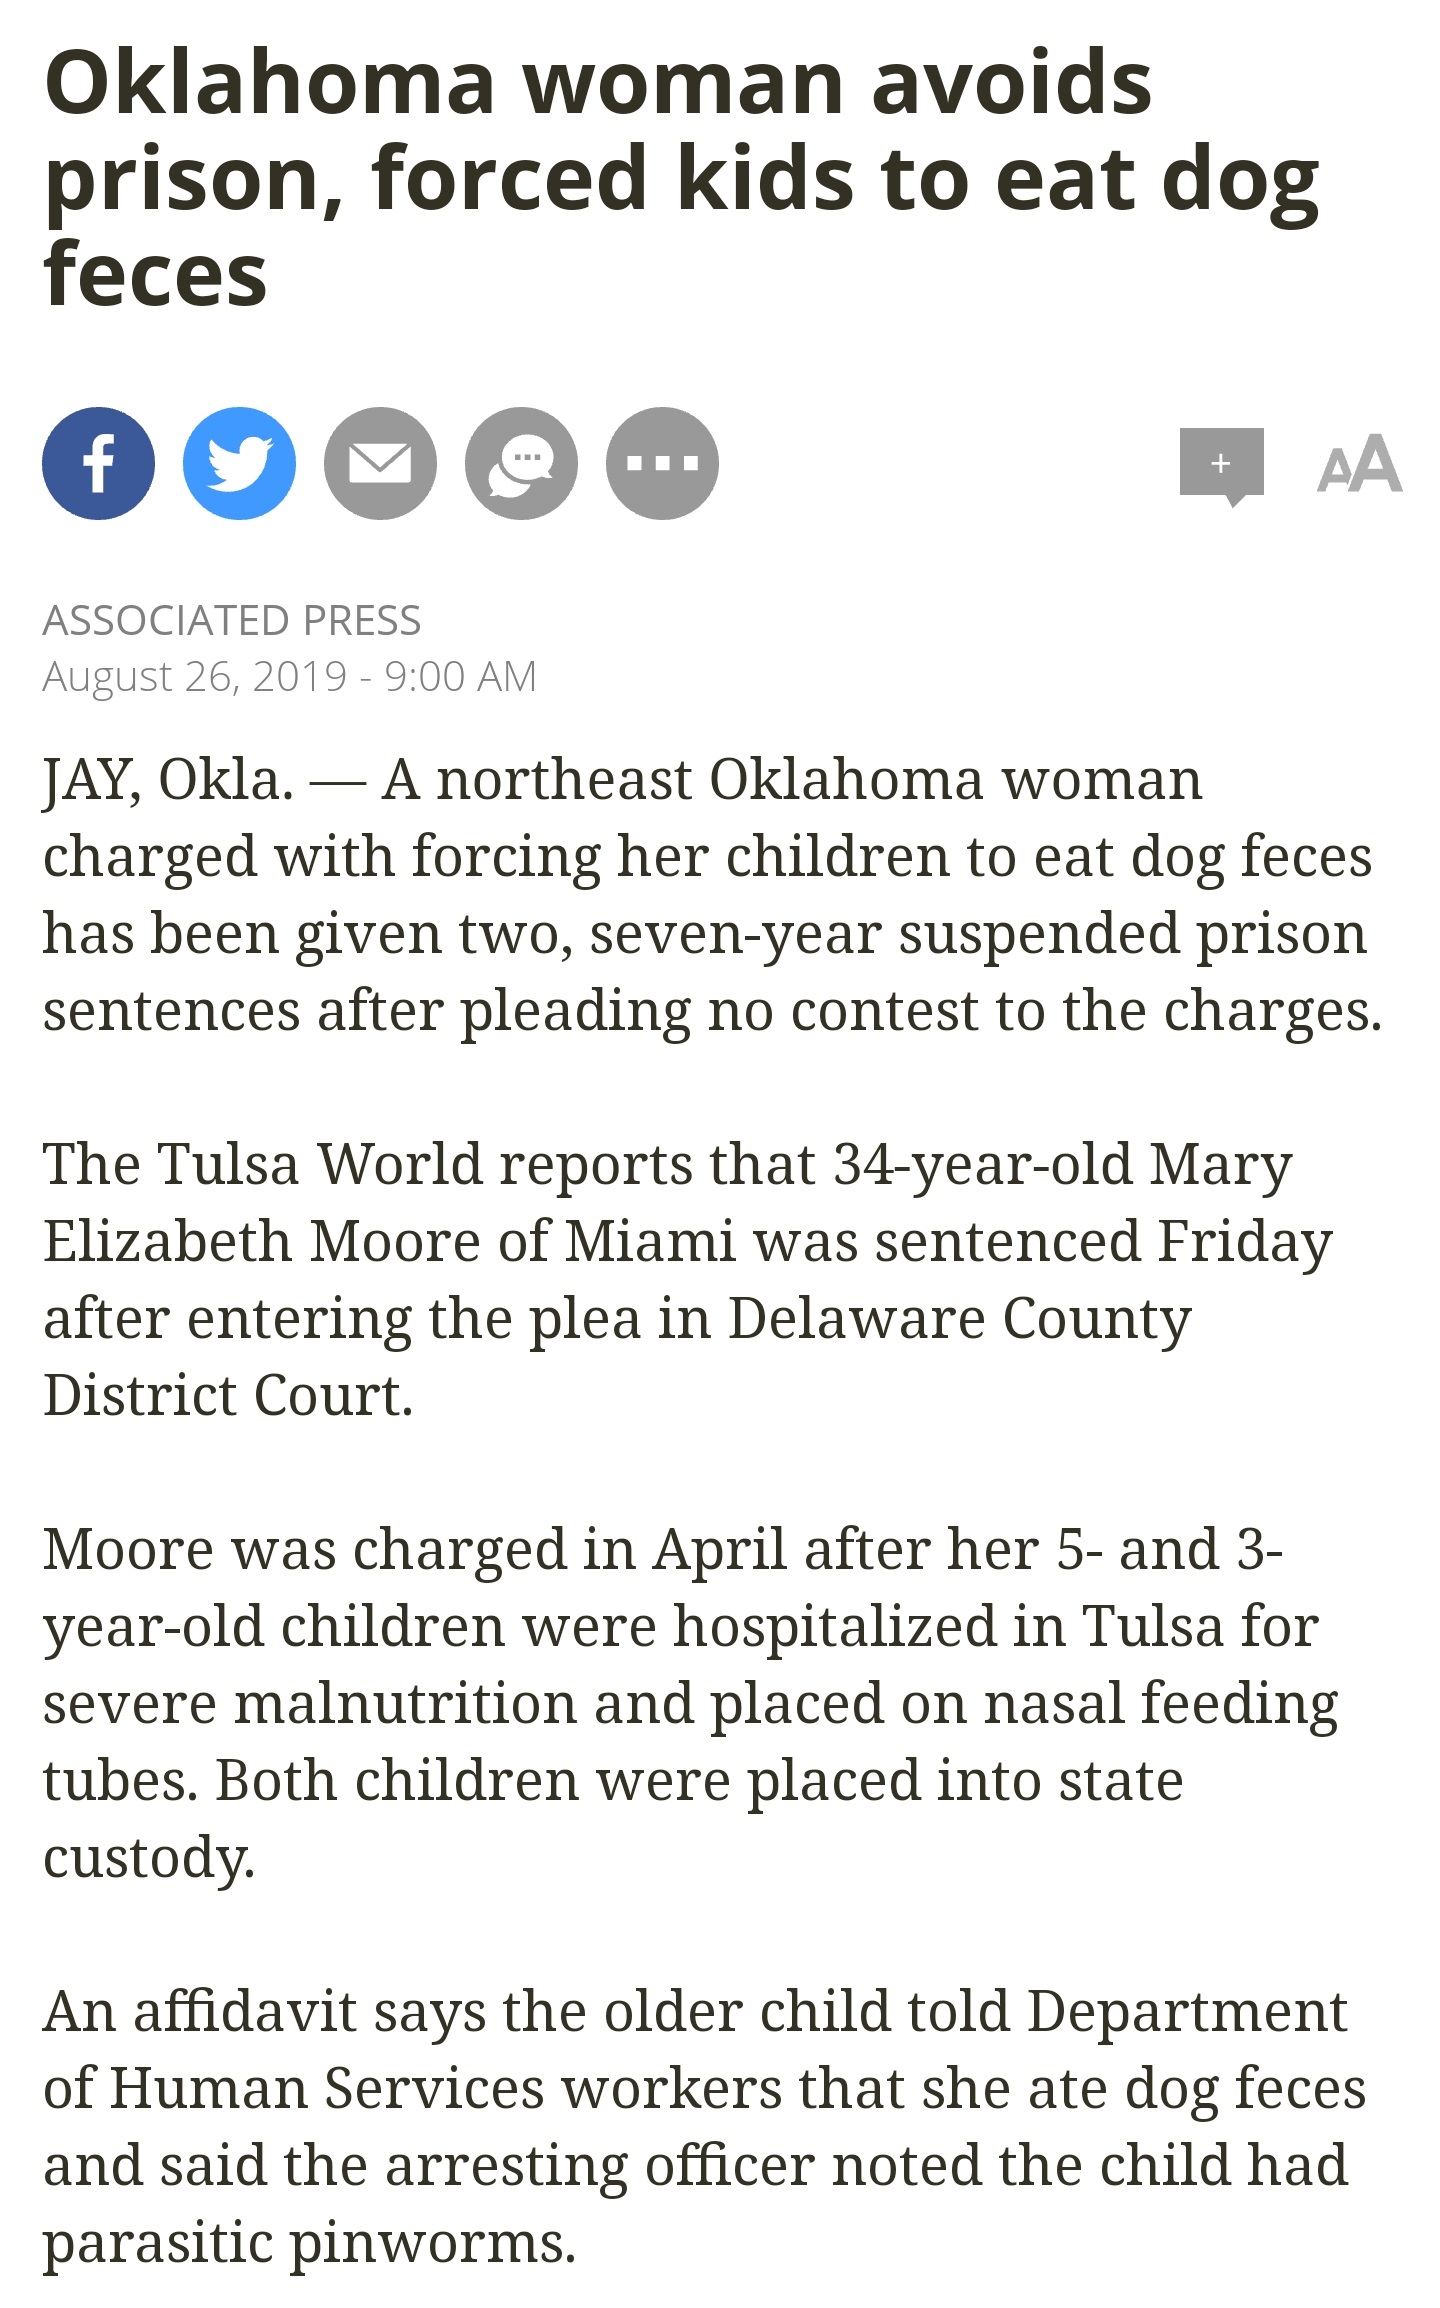 Oklahoma woman avoids prison, forced kids to eat dog feces Associated Press Jay, Okla. A northeast Oklahoma woman charged with forcing her children to eat dog feces has been given two, sevenyear suspended prison sentences after pleading no cont